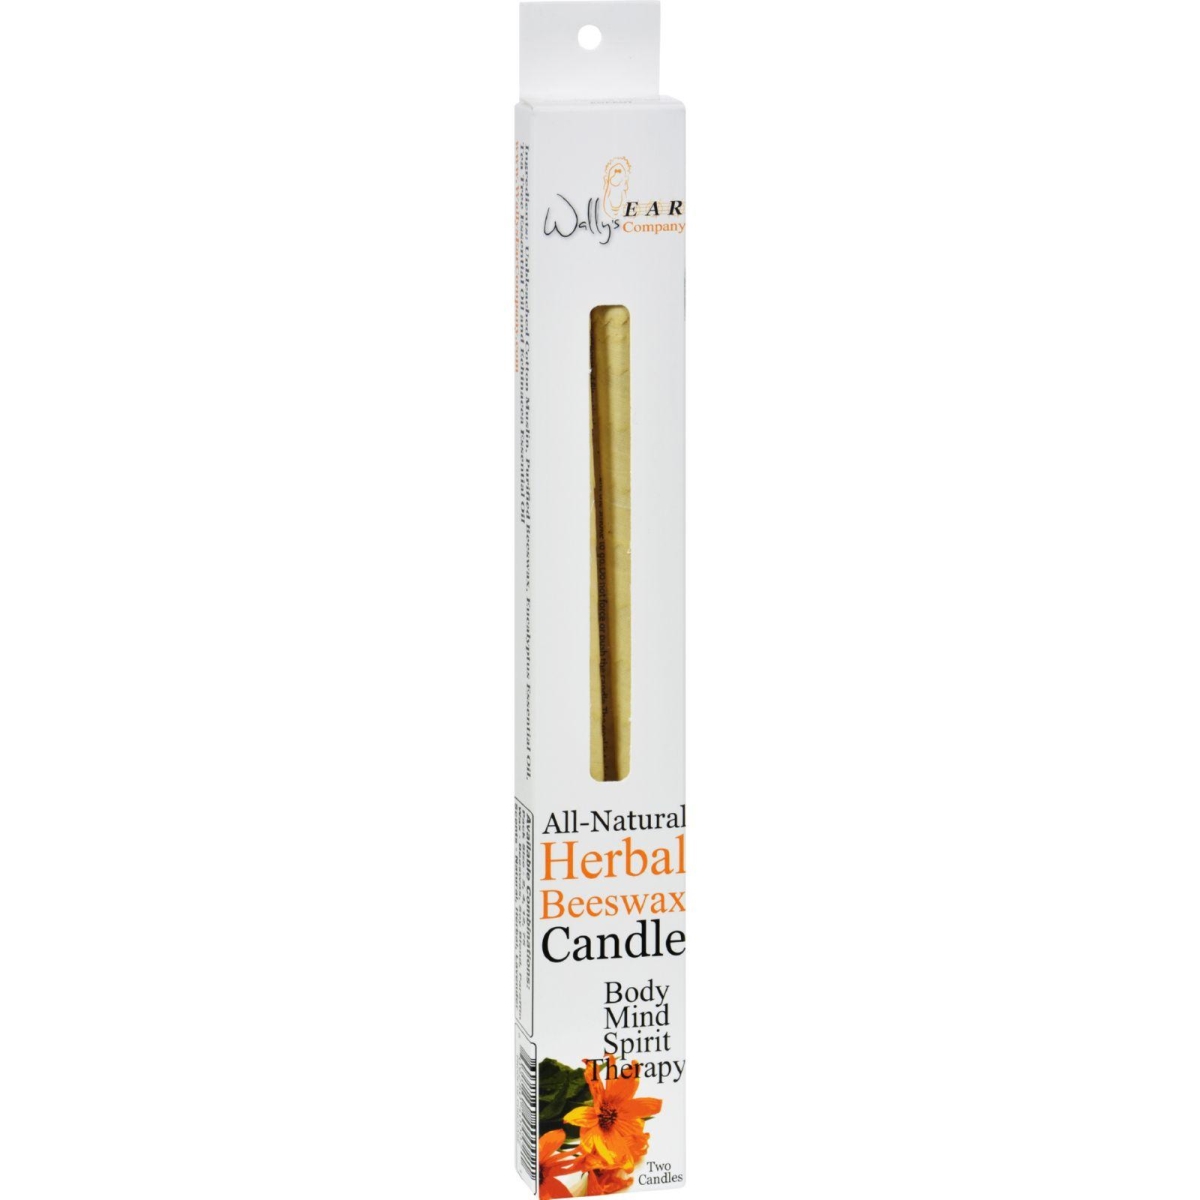 Hg0115956 Herbal Beeswax Candles - Pack Of 2